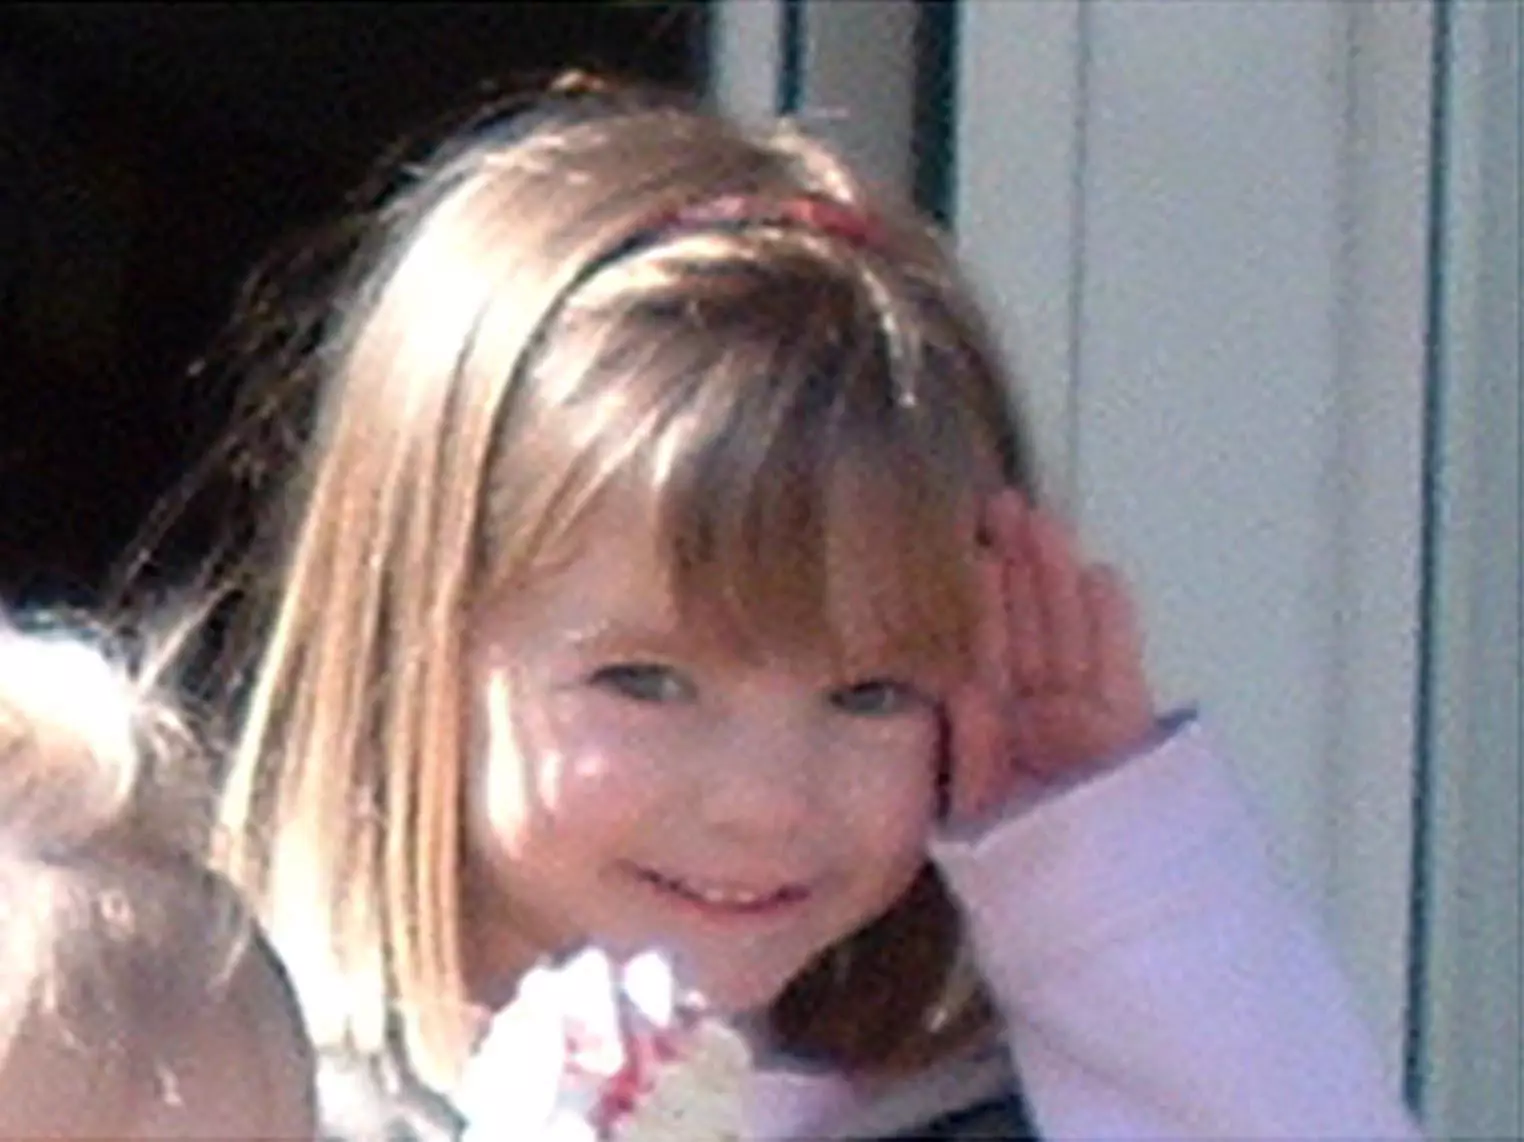 Madeleine McCann was three-years-old when she disappeared in 2007.